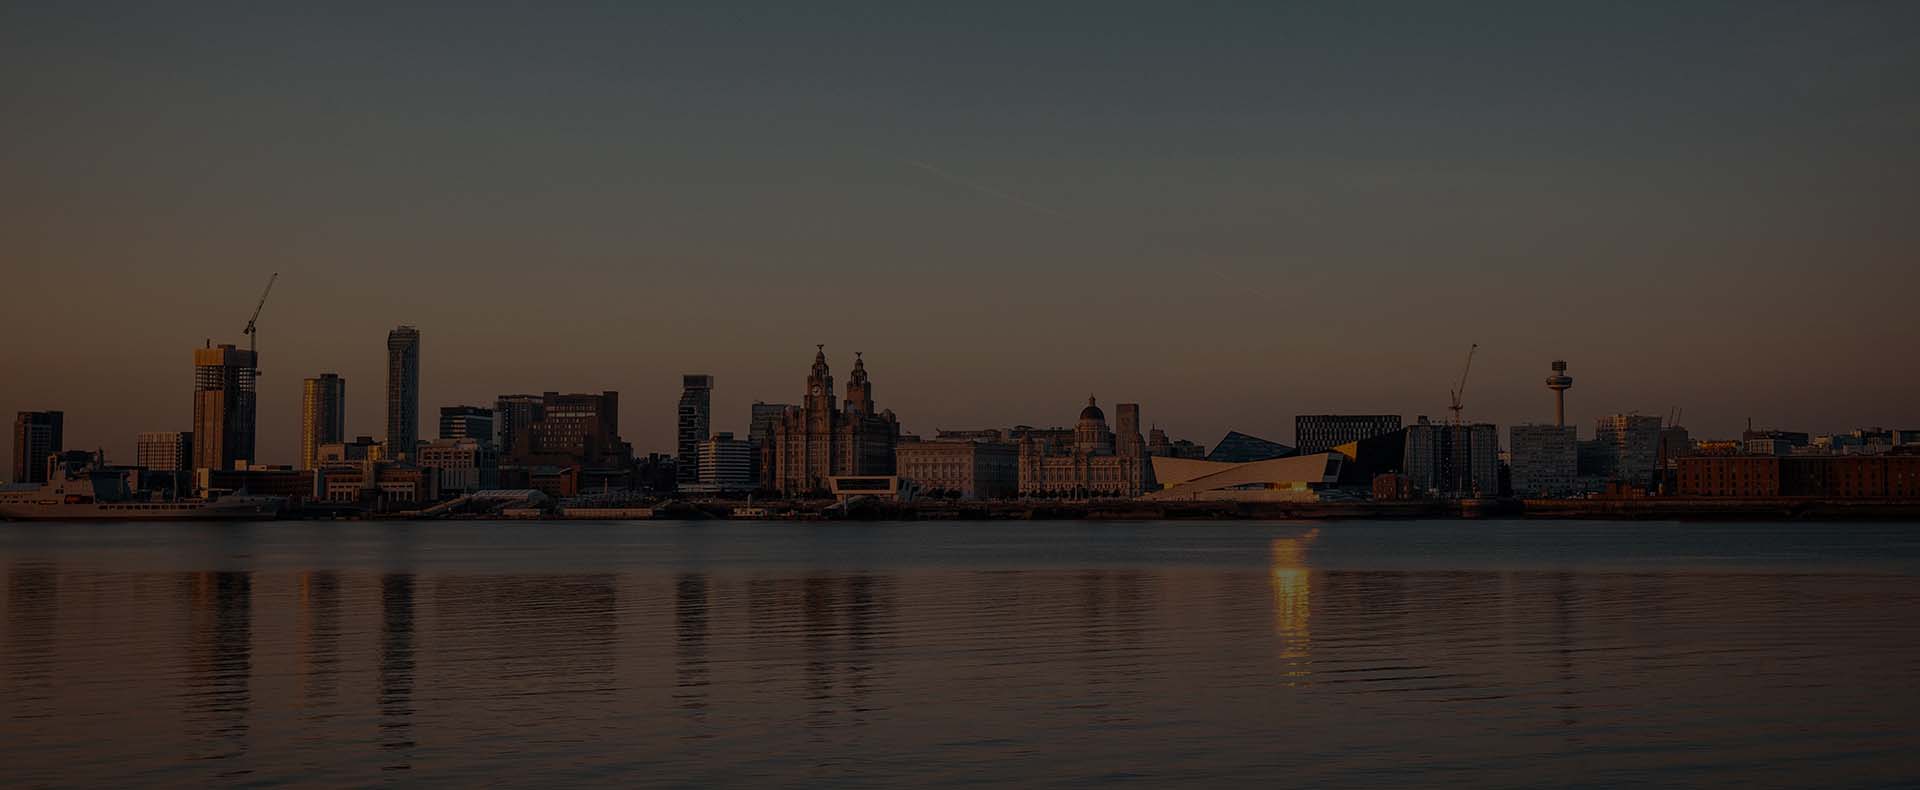 Albert Dock in Liverpool City Centre with buildings on land and the River Mersey in front.